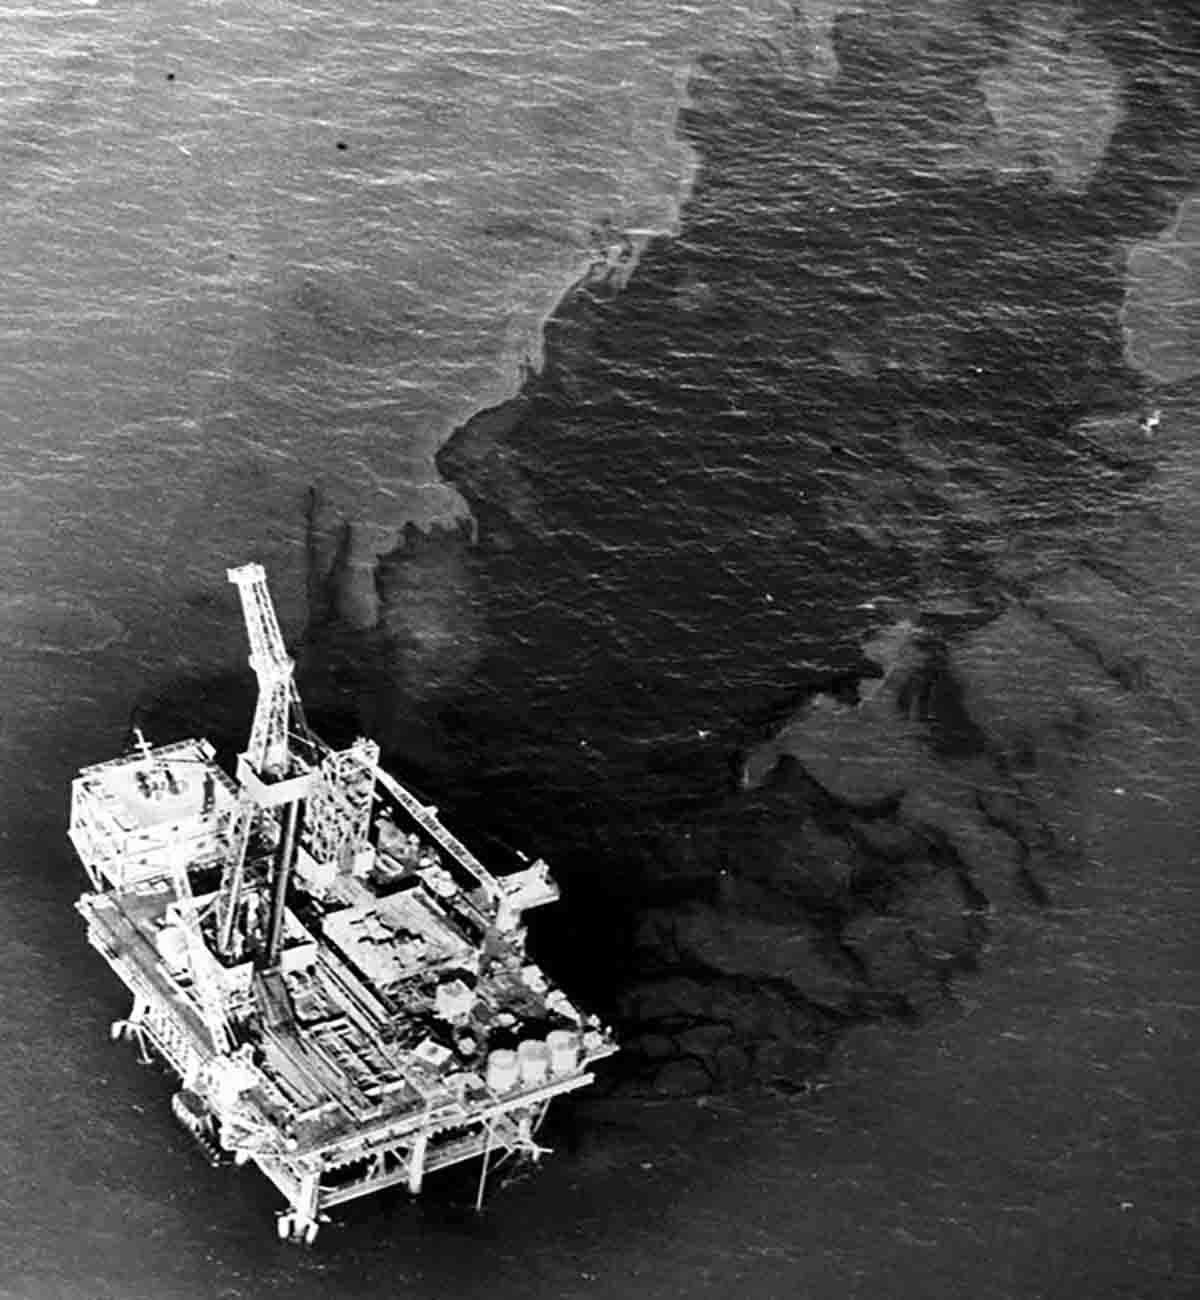 A black and white photo of a boat floating near an oil spill